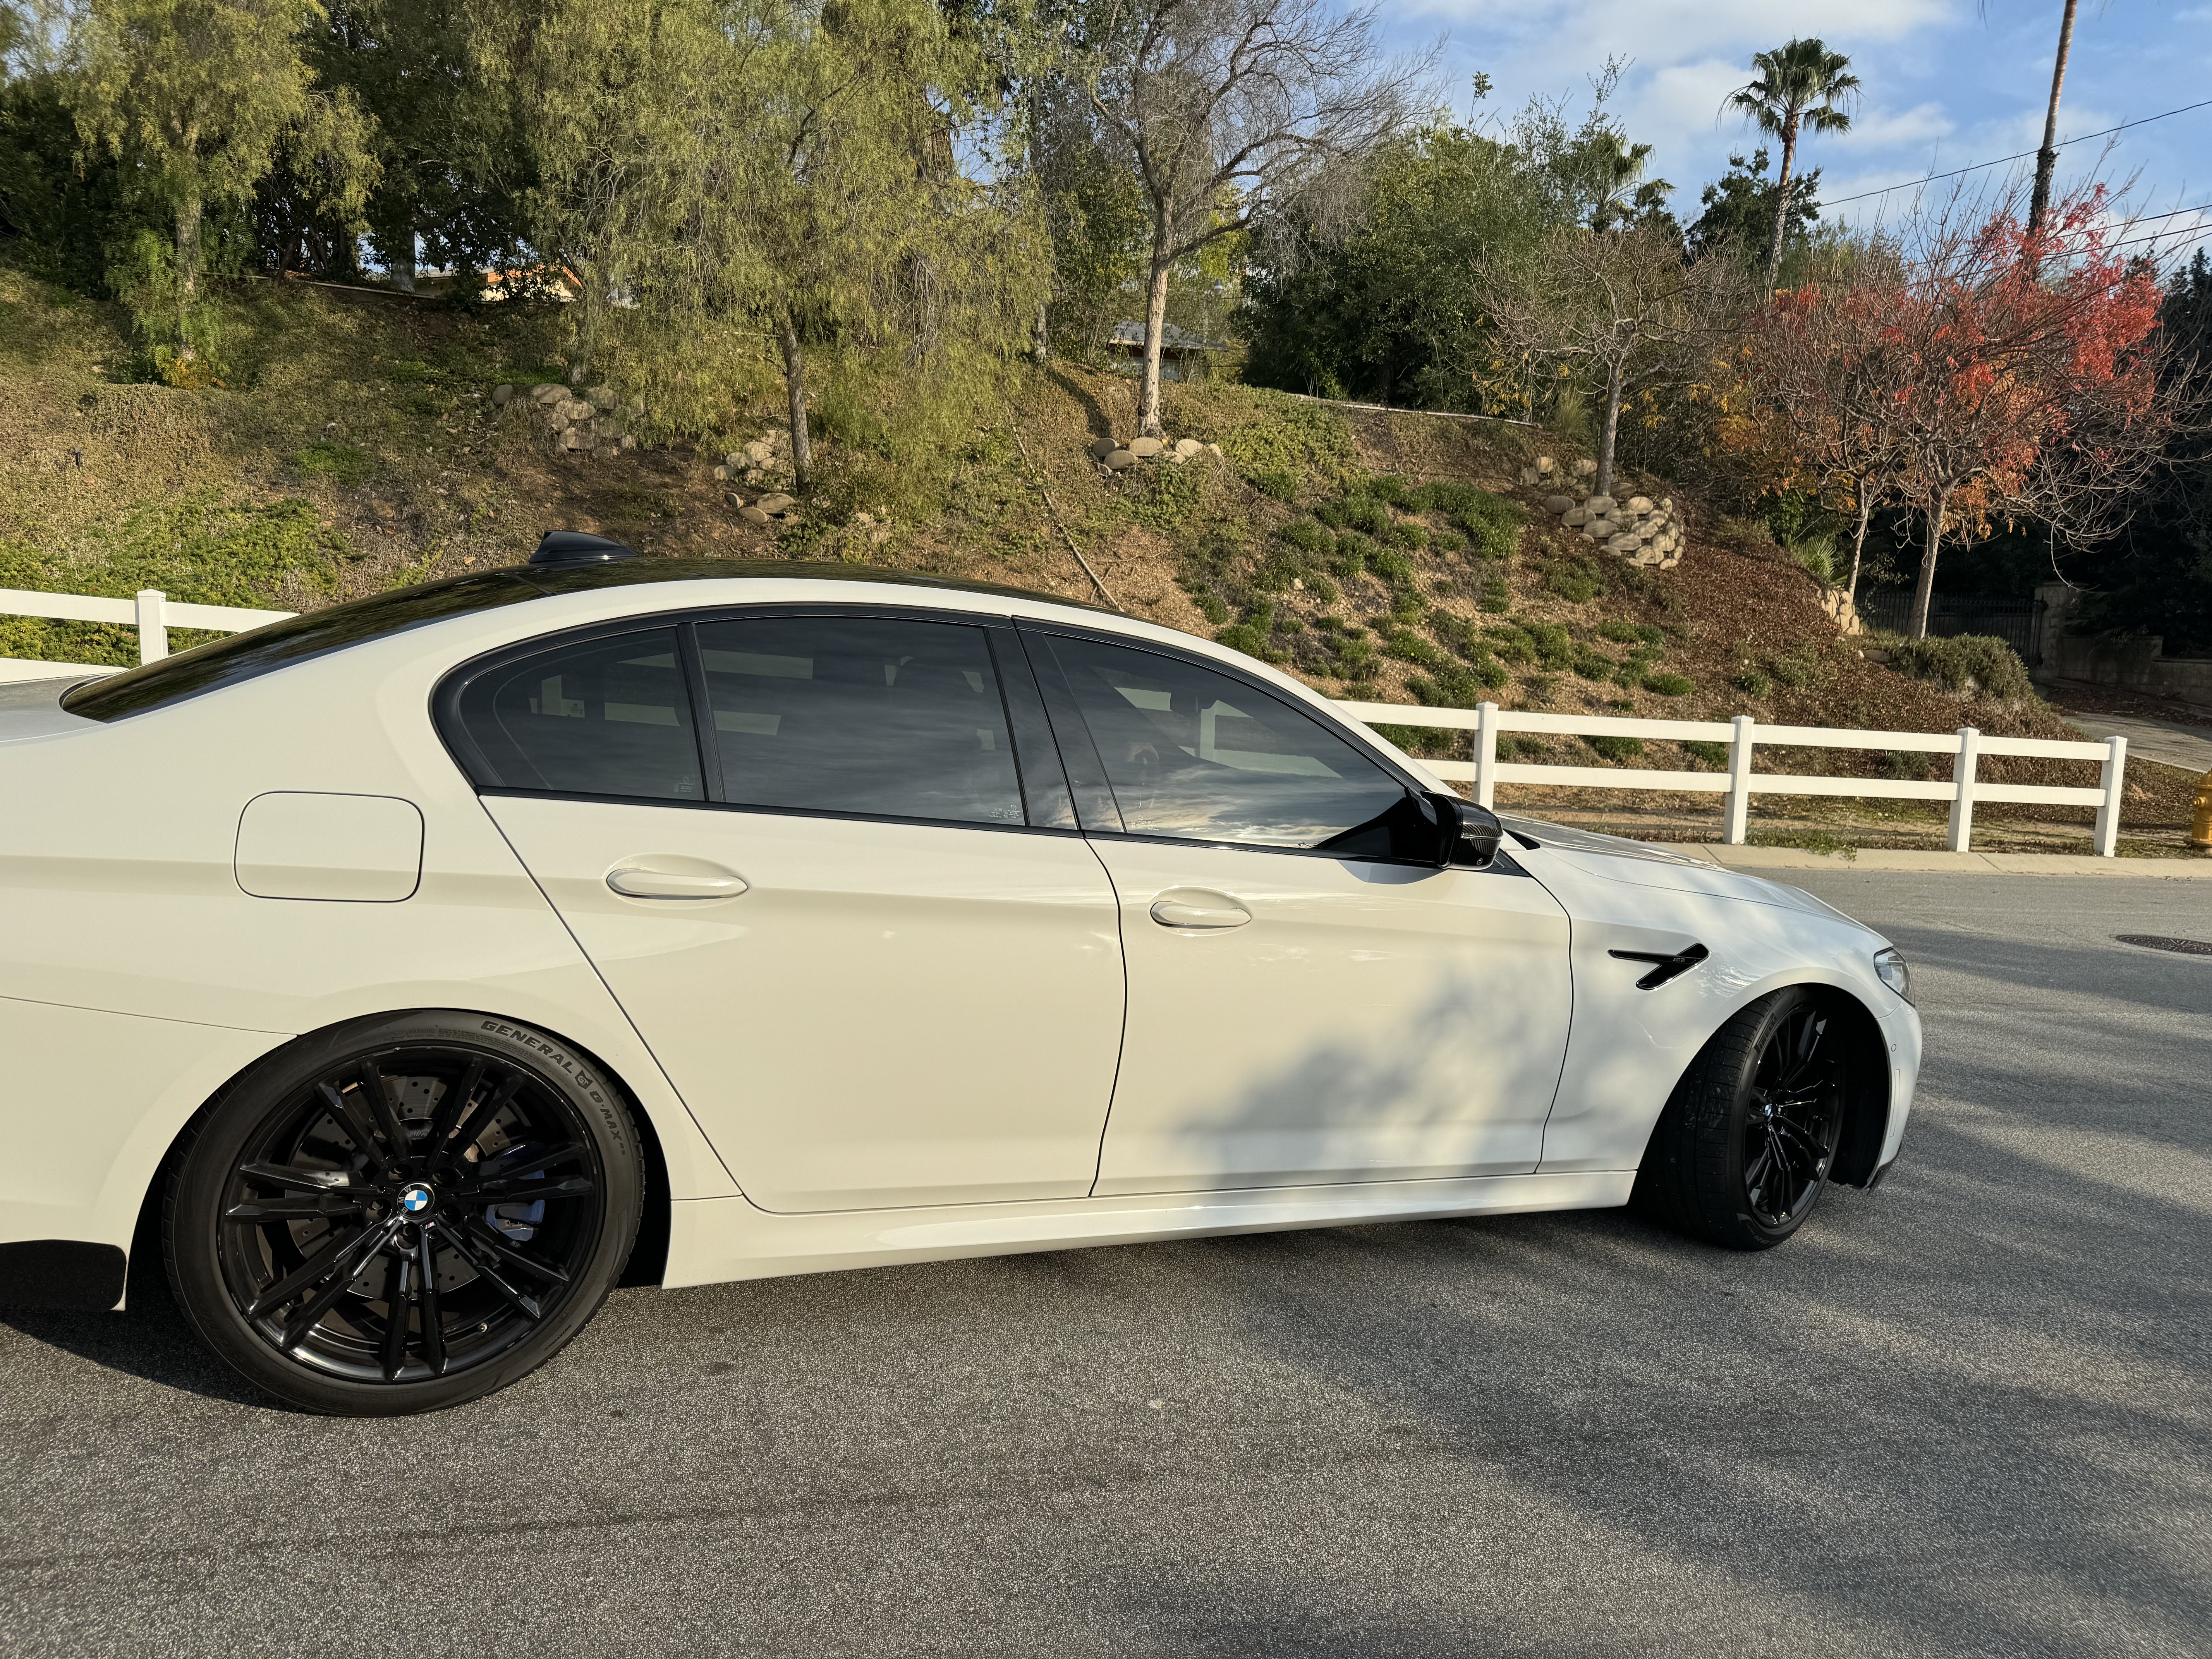 It's Amazing How Cheap the F10 BMW M5 Has Become - Autotrader